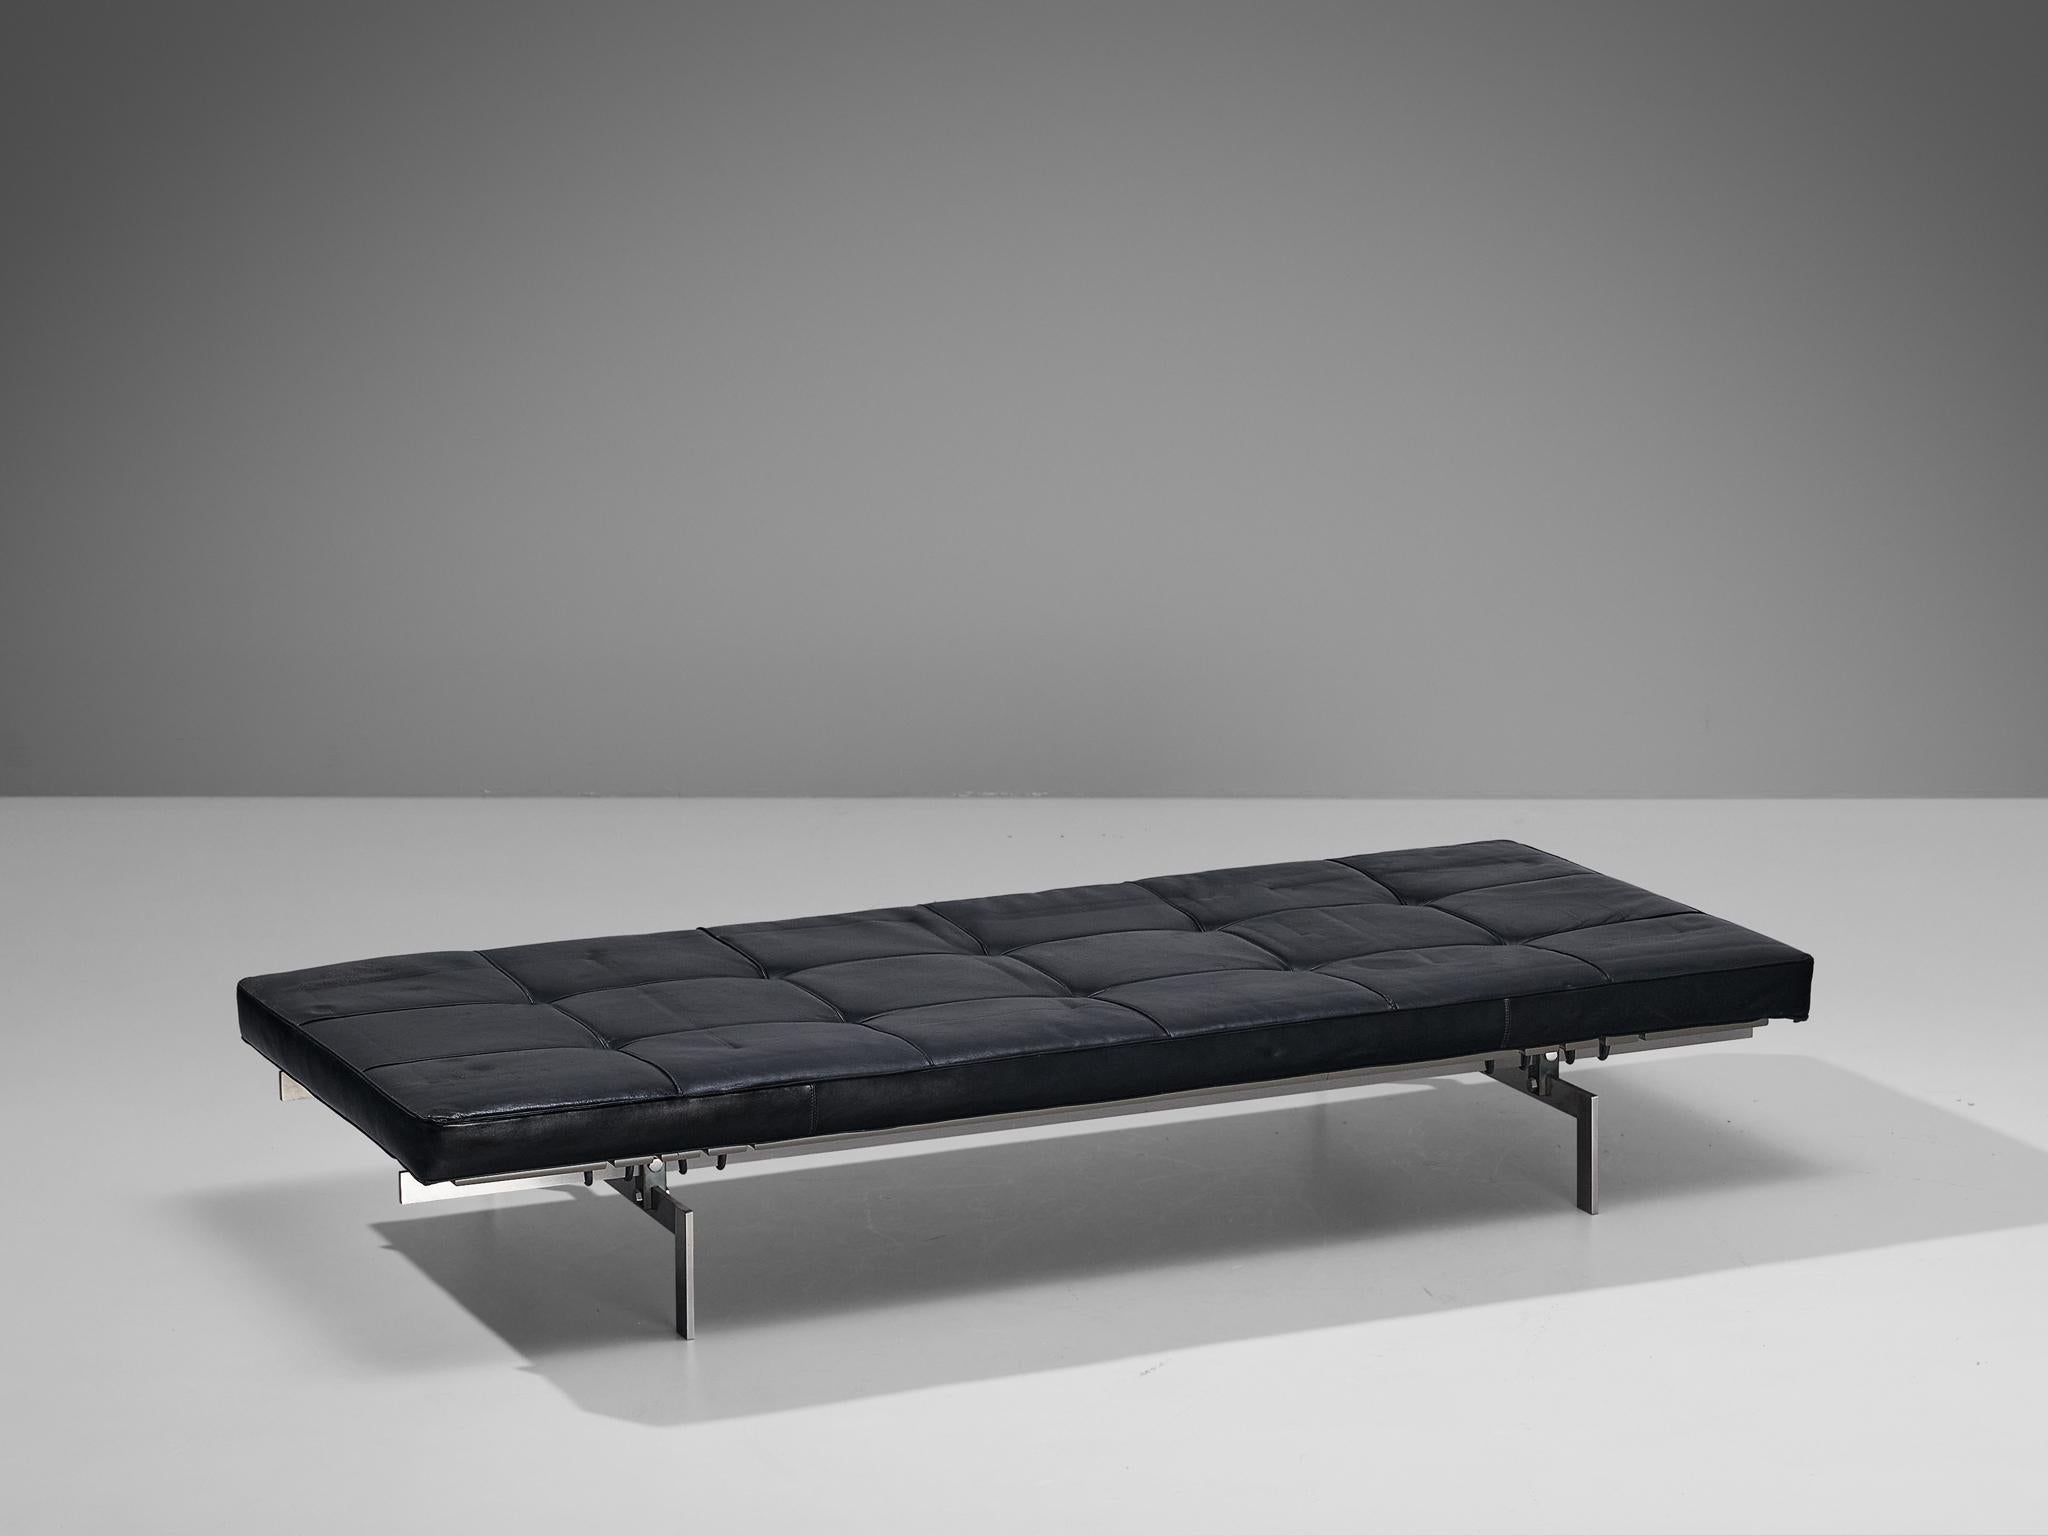 Poul Kjærholm for E. Kold Christensen, PK80 daybed, leather and stainless steel, Denmark, 1957

This stunning, patinated PK80 daybed is designed by Poul Kjaerholm in 1957. The chosen materials are typical for Poul Kjaerholm as he embraced Industrial